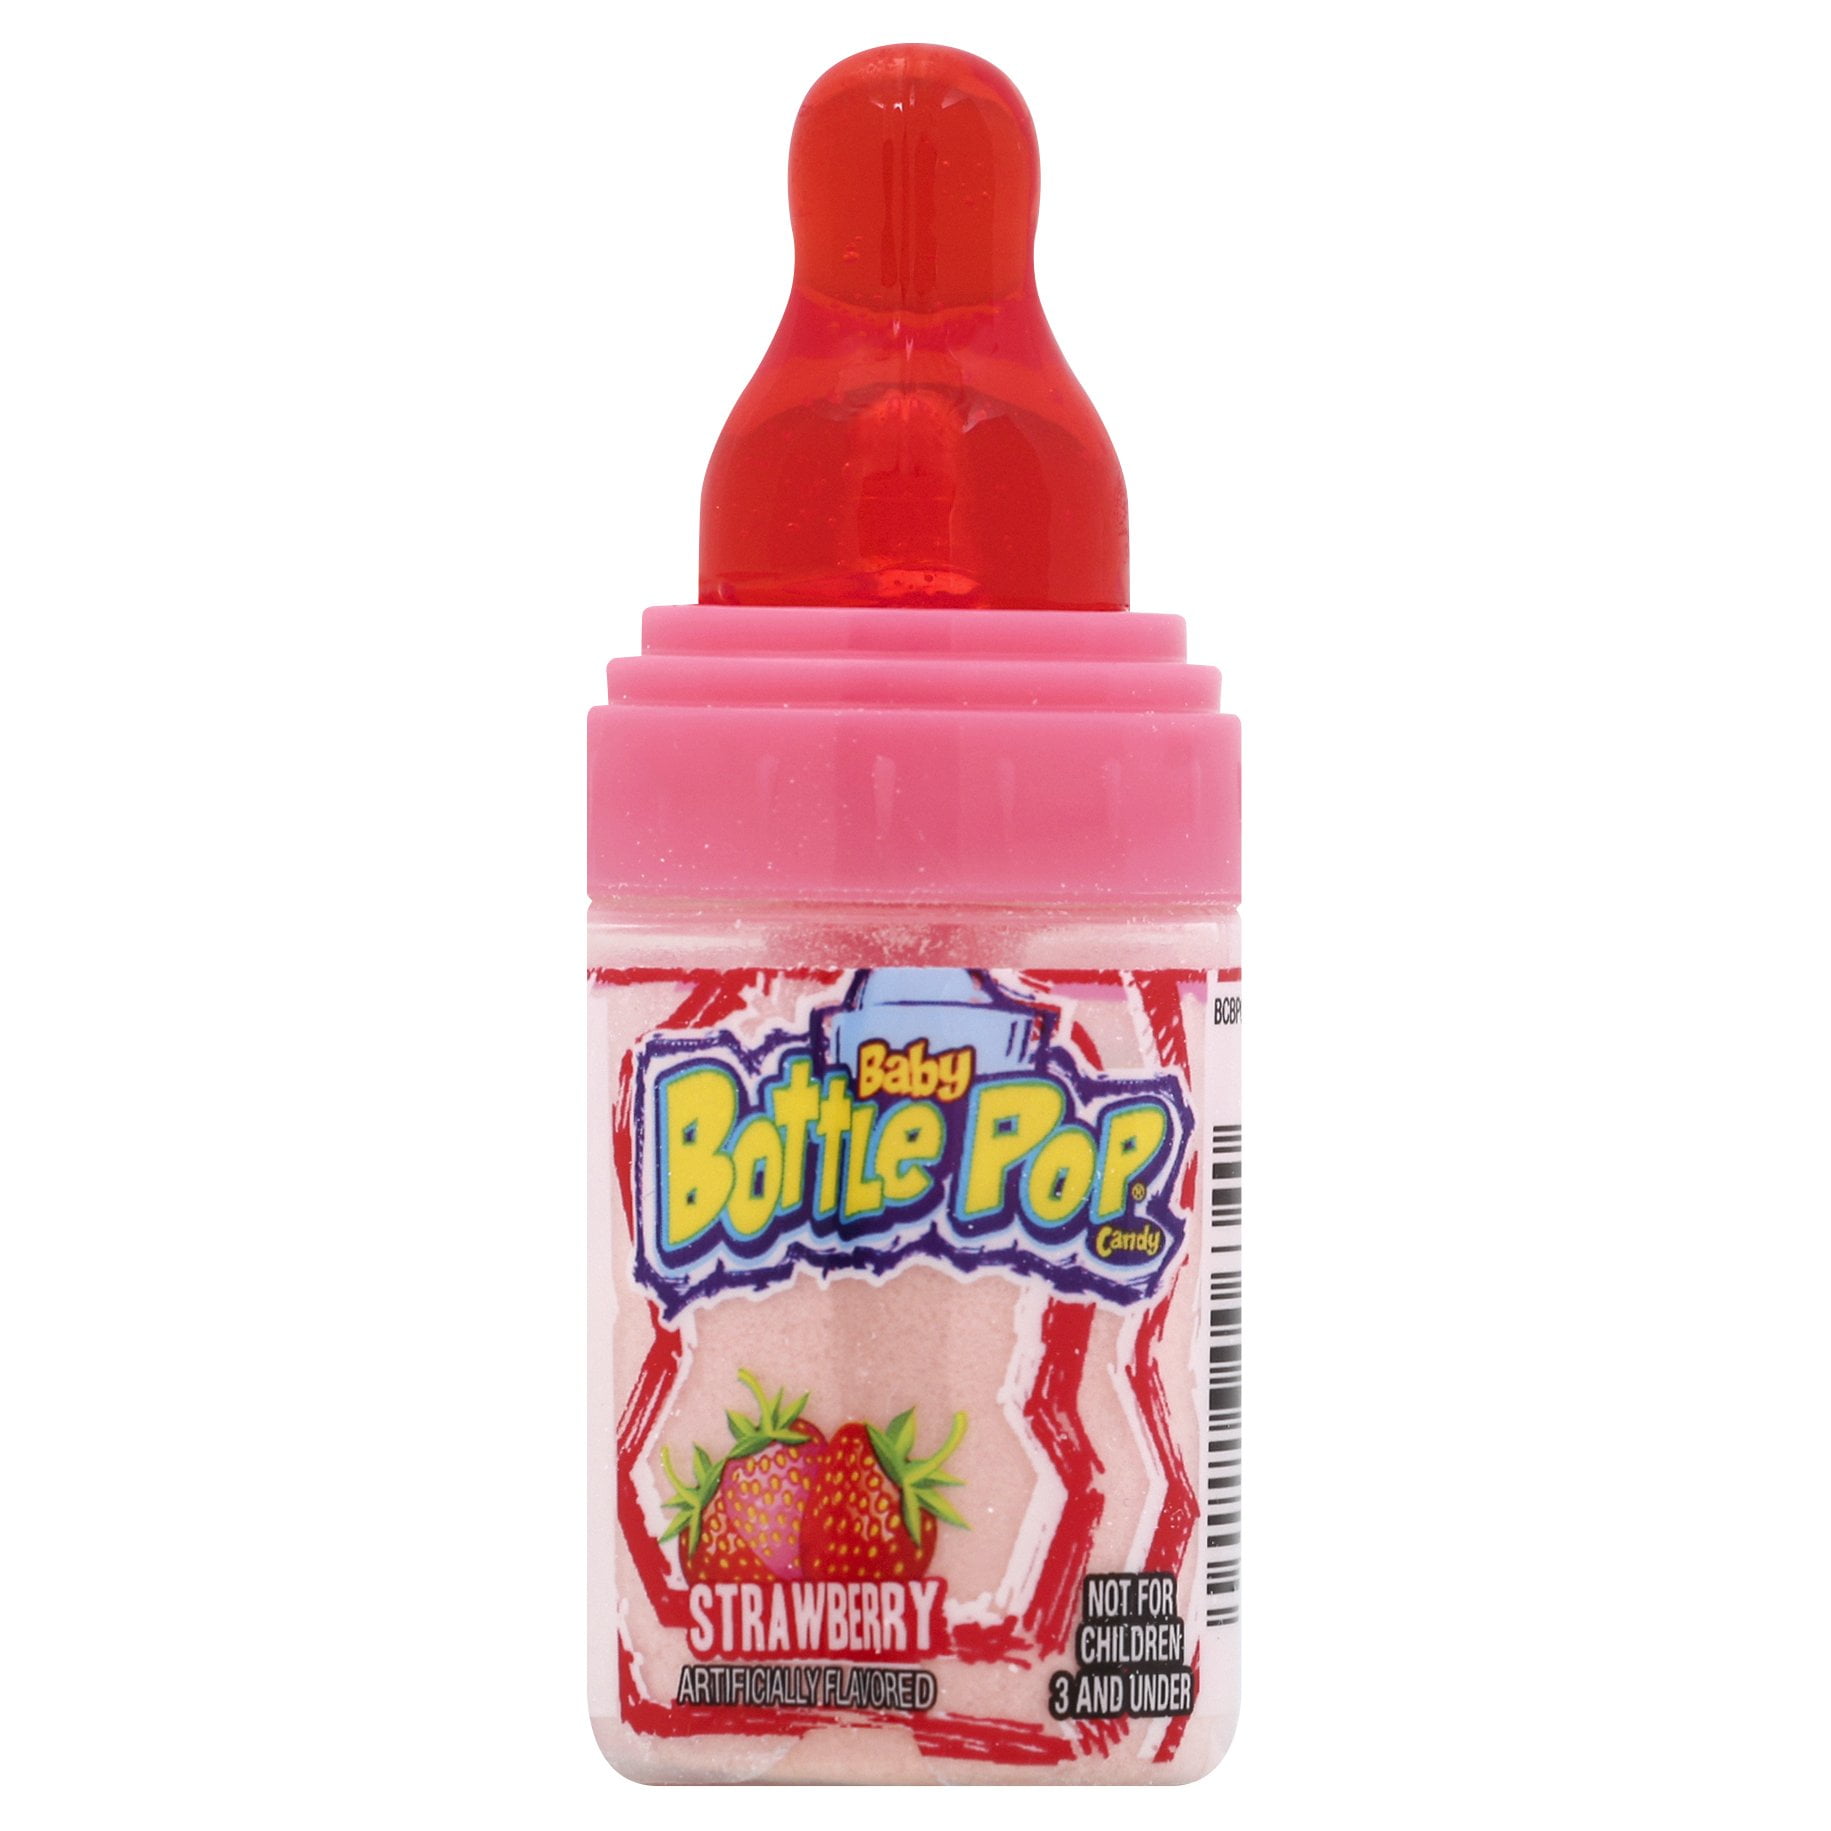 Baby Bottle Pop Original Candy Lollipops with Dipping Powder, Assorted Flavors, 1.1 oz